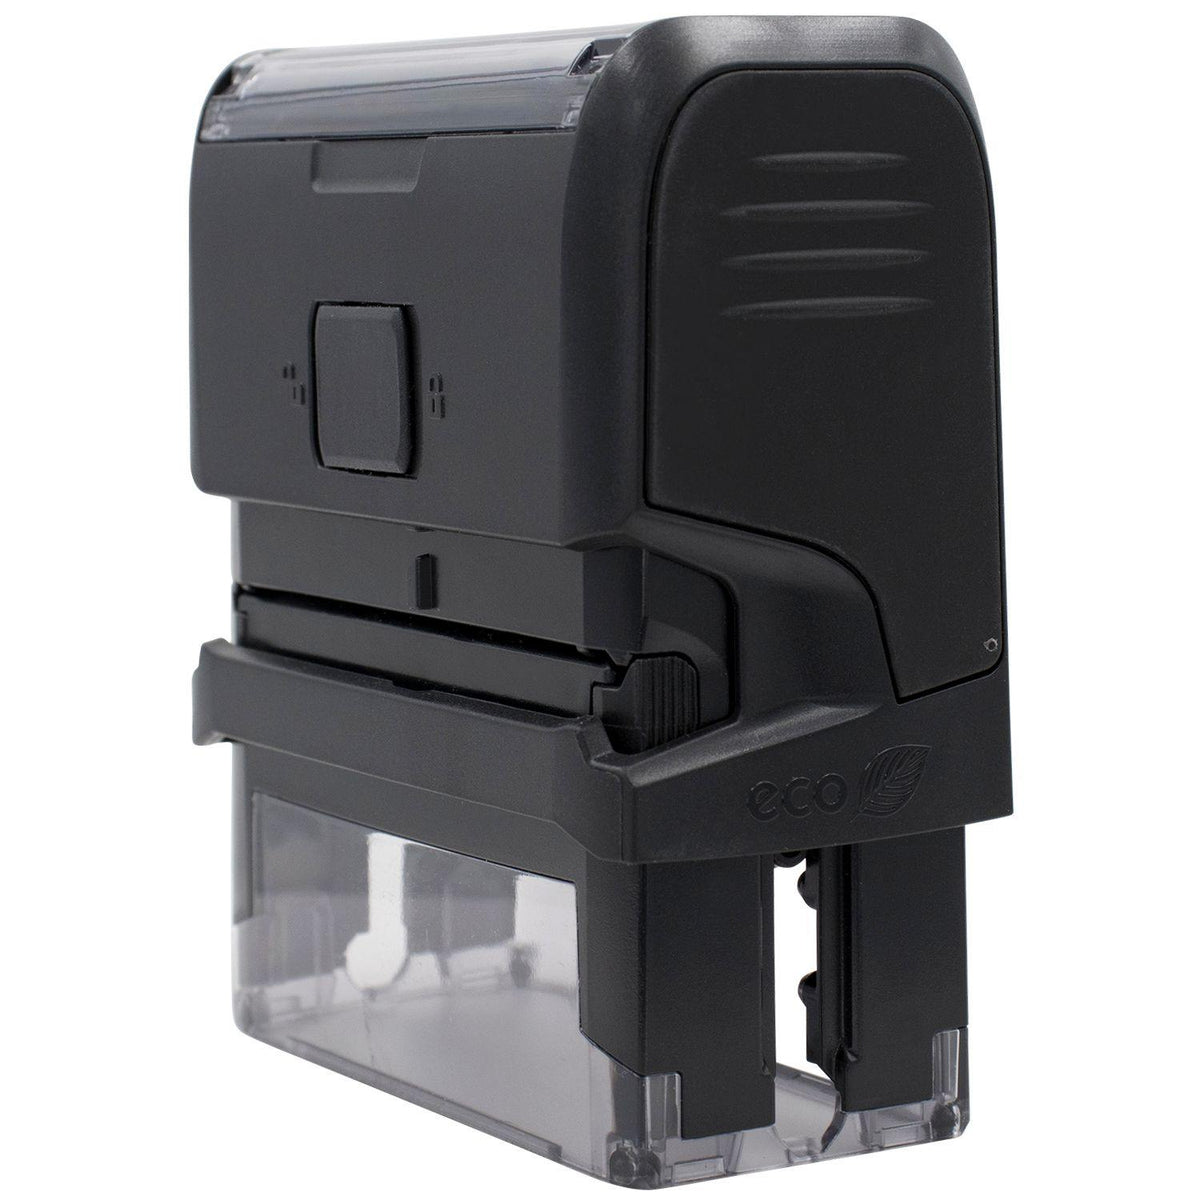 Side View of Large Self-Inking Cargado Stamp at an Angle